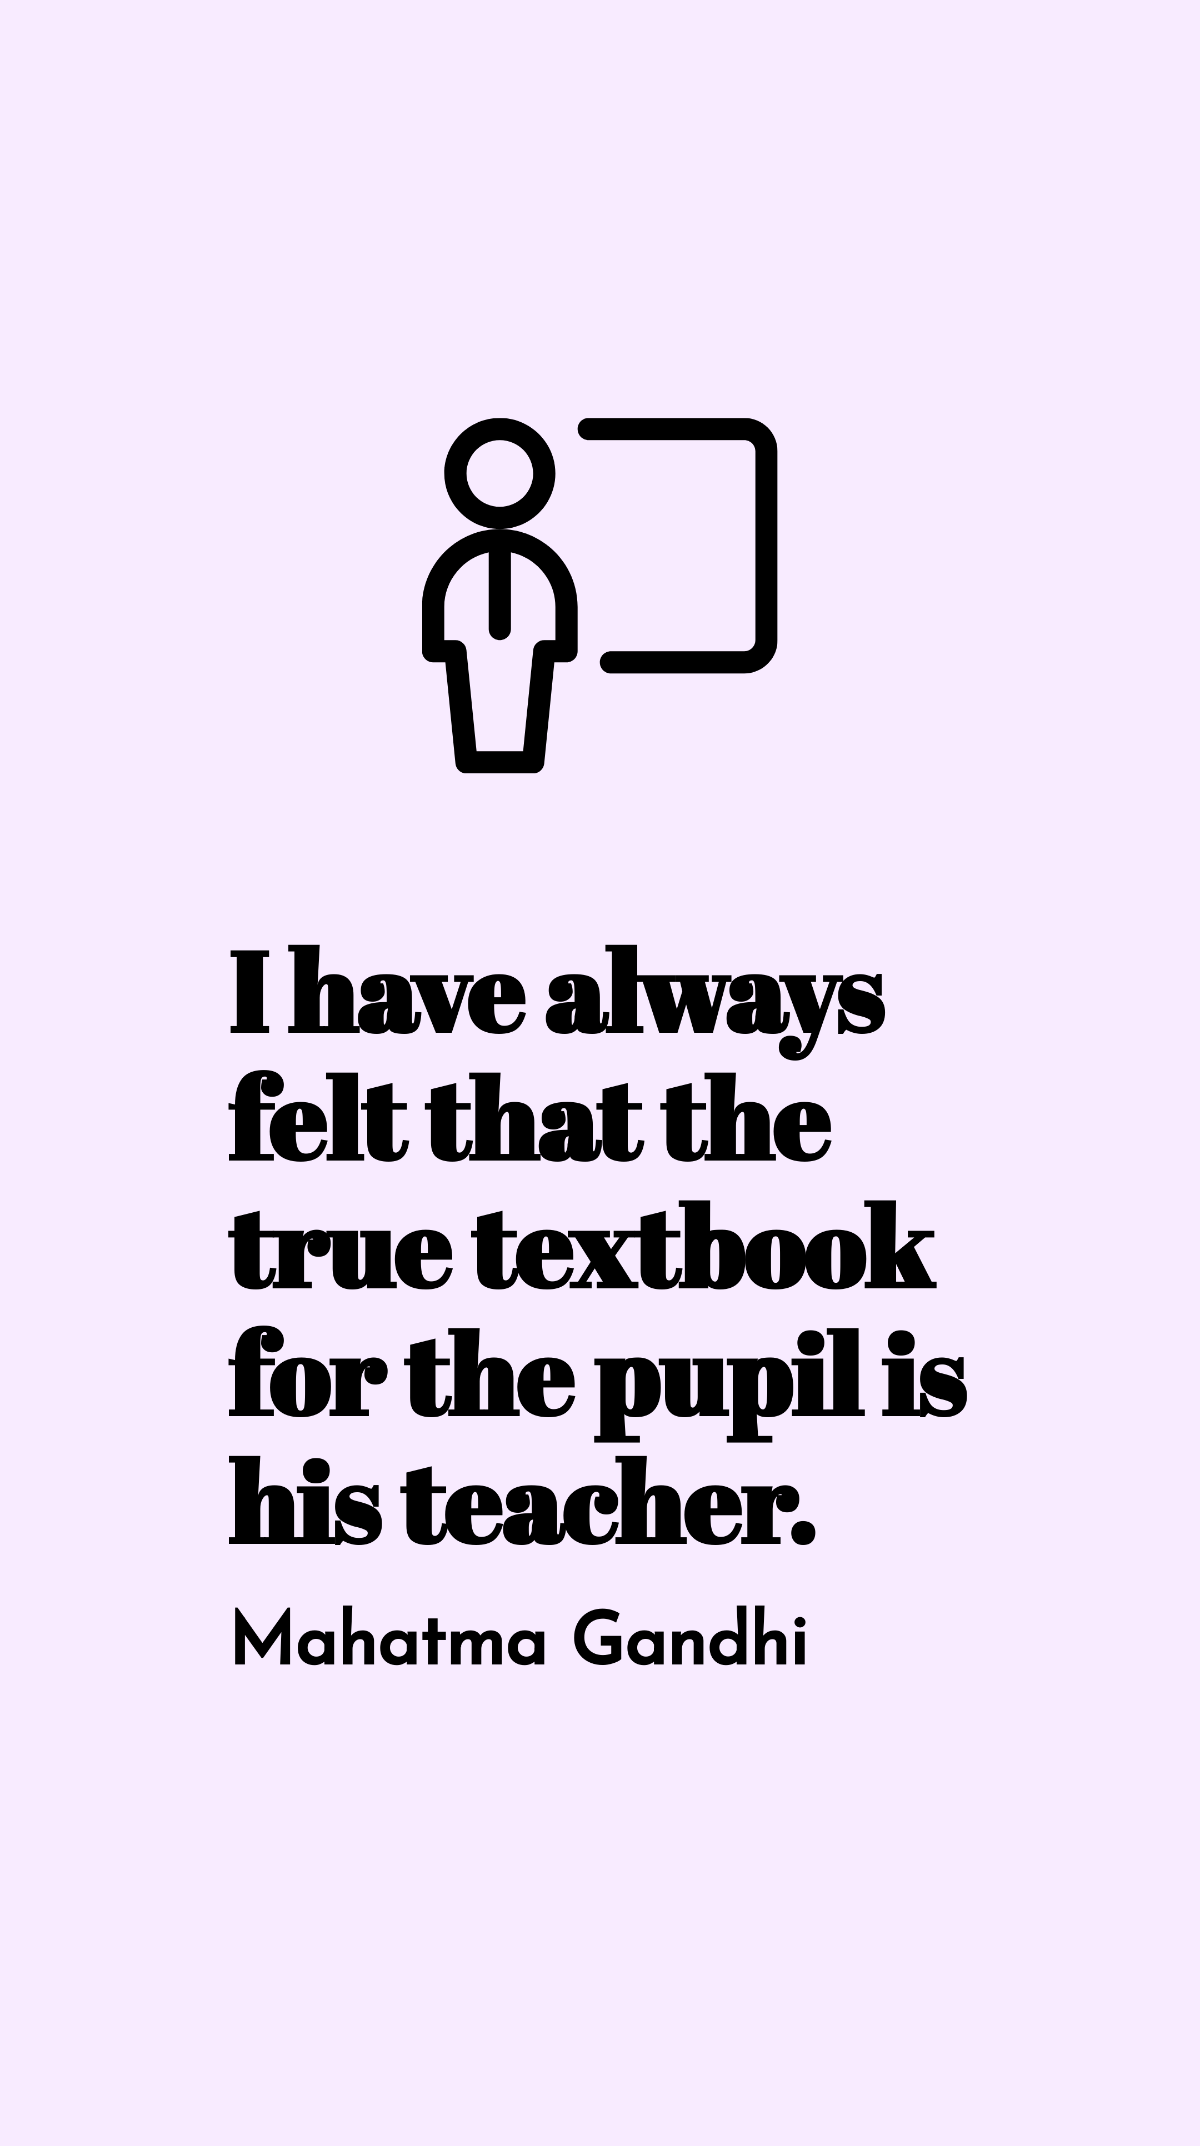 Free Mahatma Gandhi - I have always felt that the true textbook for the pupil is his teacher. Template